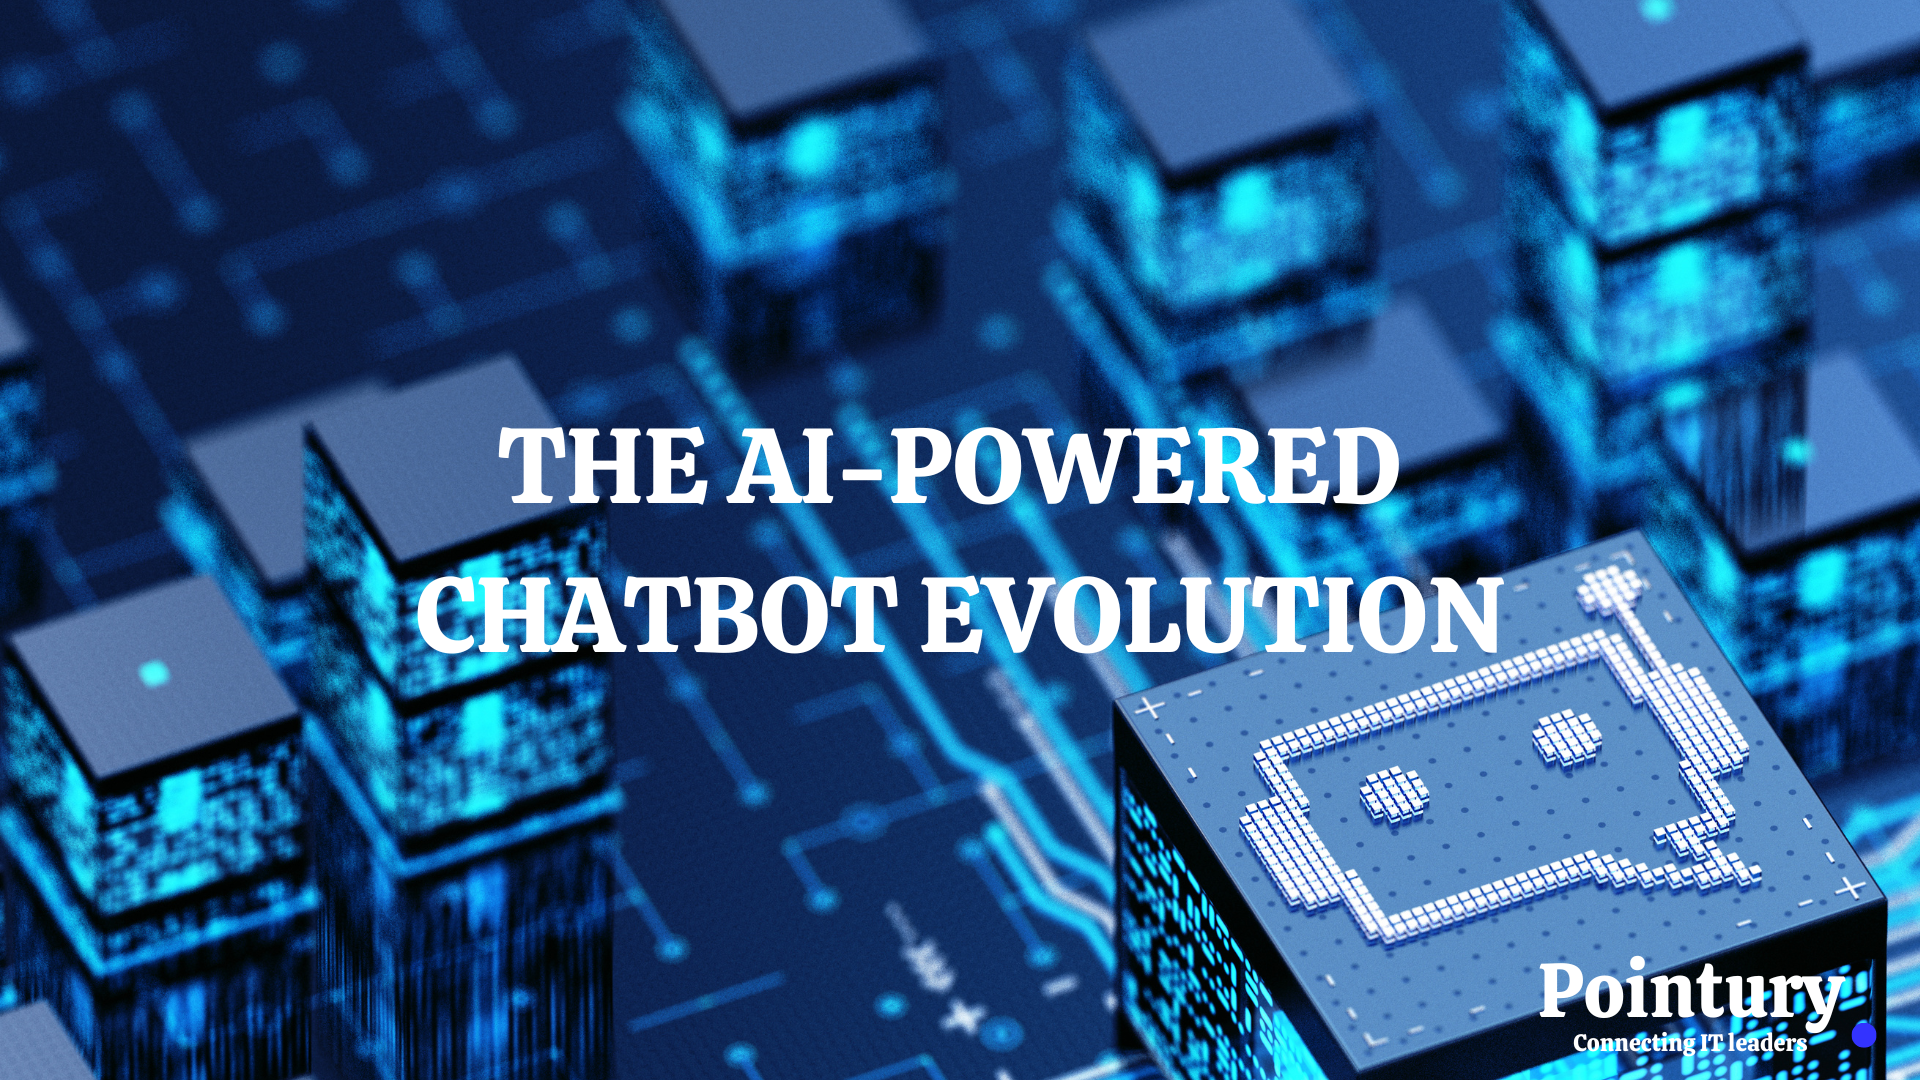 THE AI-POWERED CHATBOT EVOLUTION